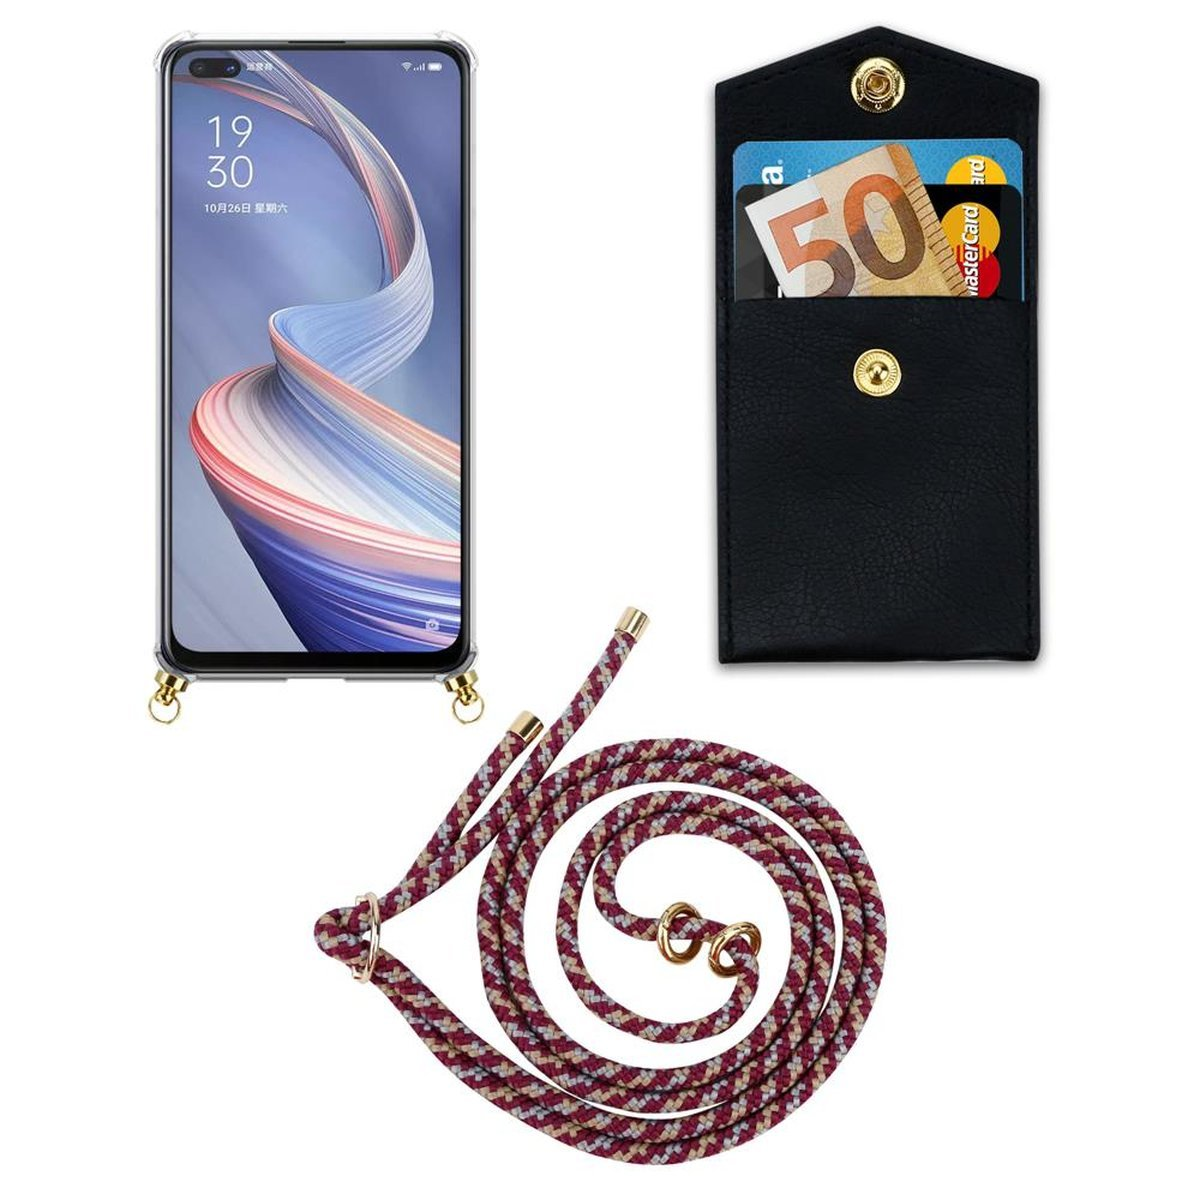 CADORABO Handy Oppo, Ringen, Gold GELB WEIß ROT abnehmbarer Band mit und Hülle, Kordel A92s, Kette Backcover